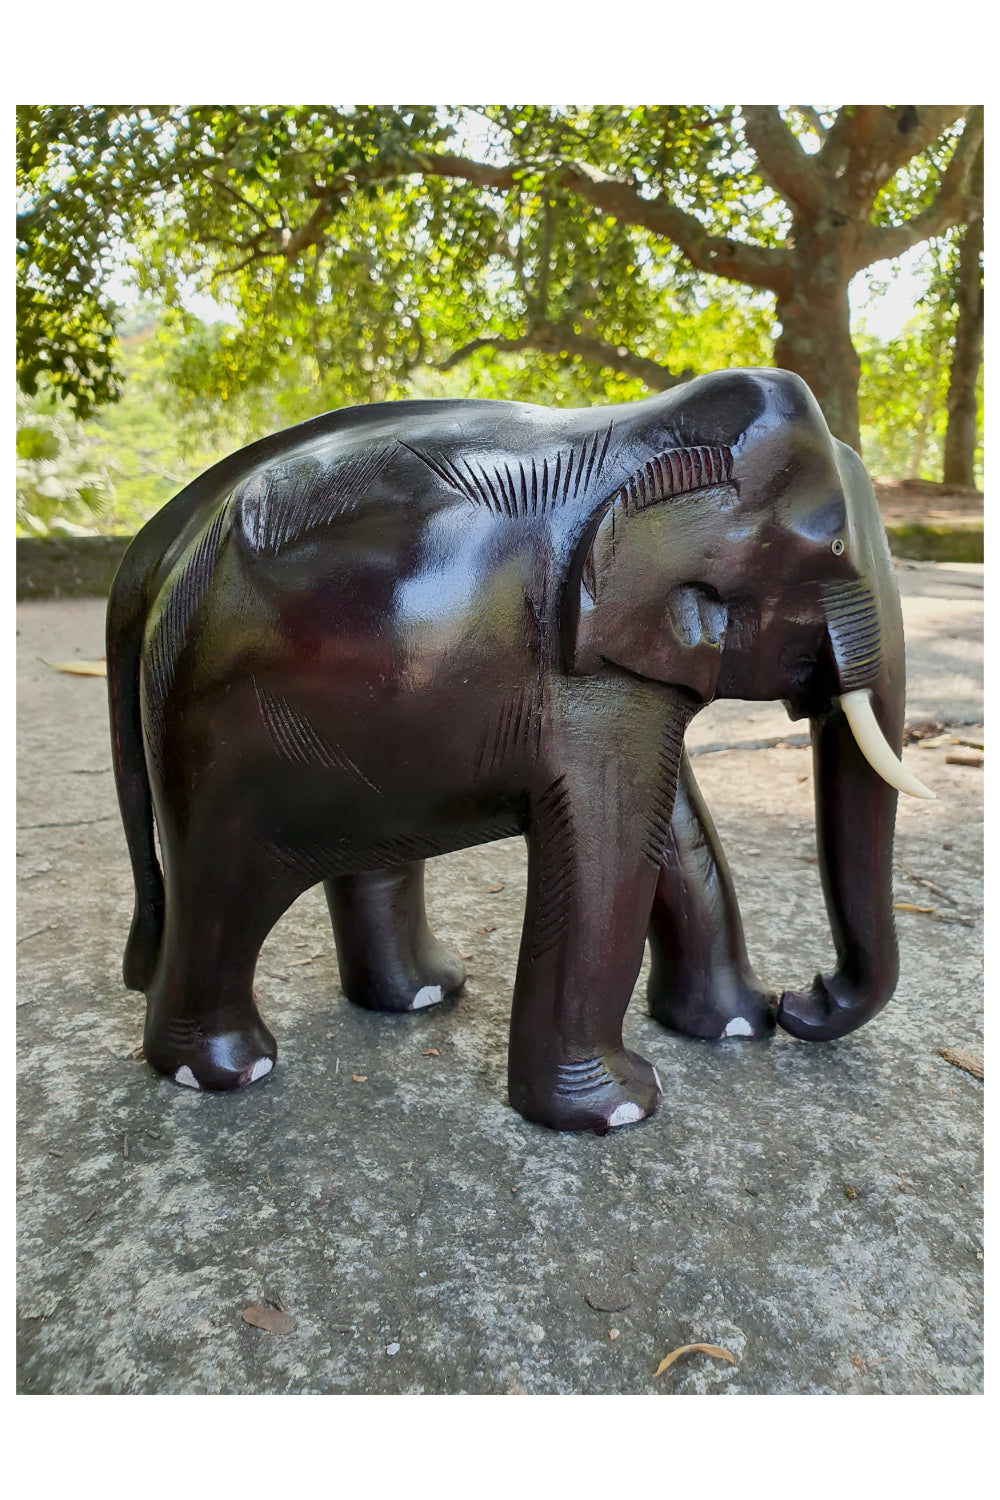 Southloom Handmade Elephant Handicraft (Carved from Mahogany Wood) 6 Inches